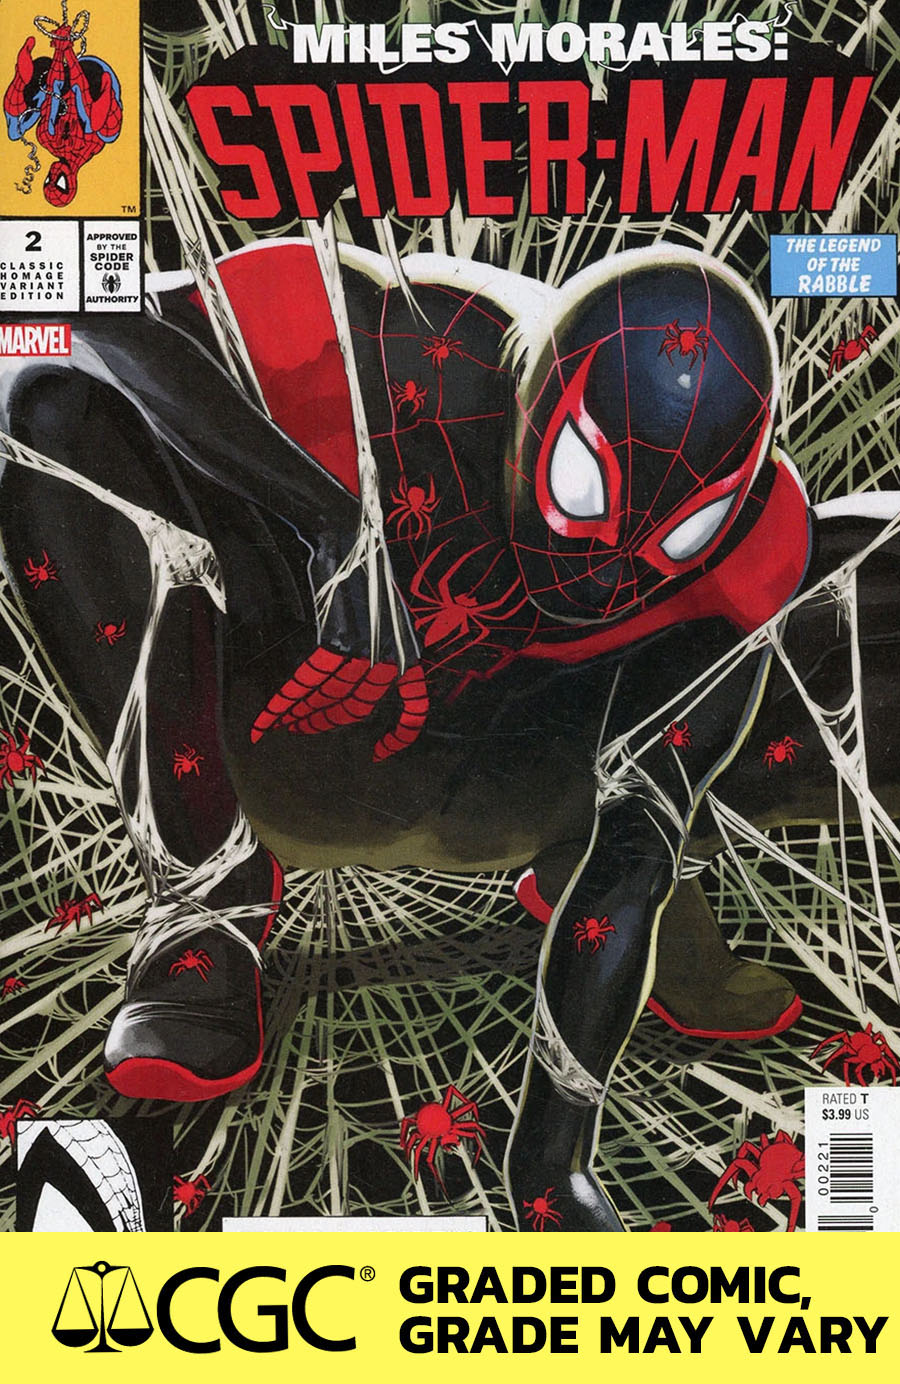 Miles Morales Spider-Man Vol 2 #2 Cover G DF Classic Homage Variant Cover CGC Graded